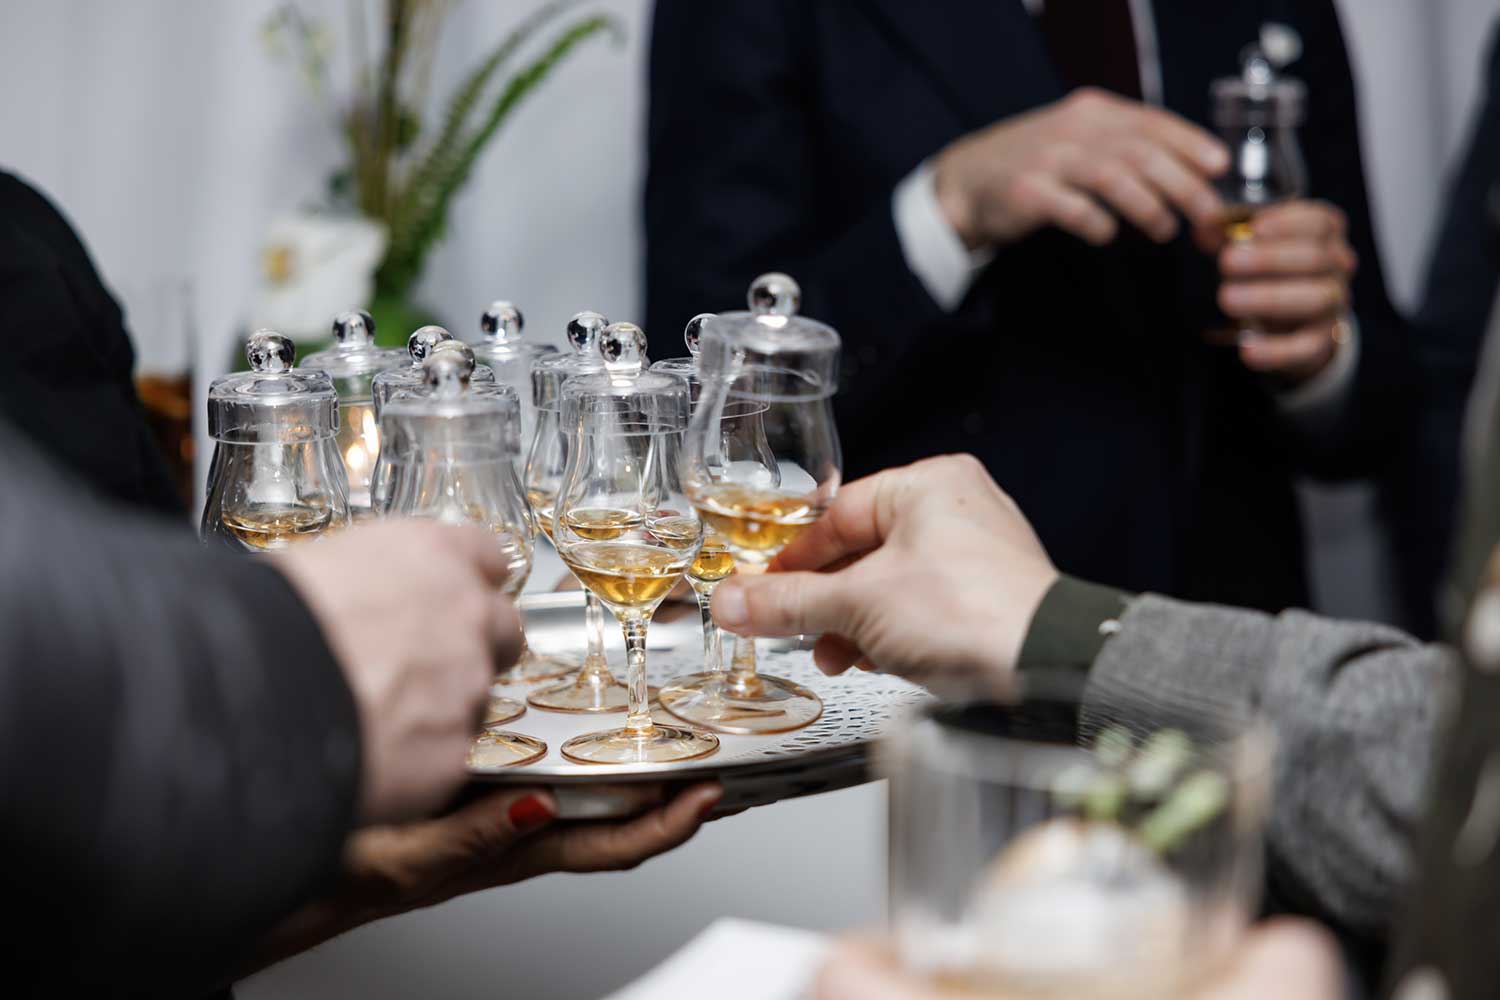 Guests grabbing tasting glasses of The Glenrothes 36 year old single cask